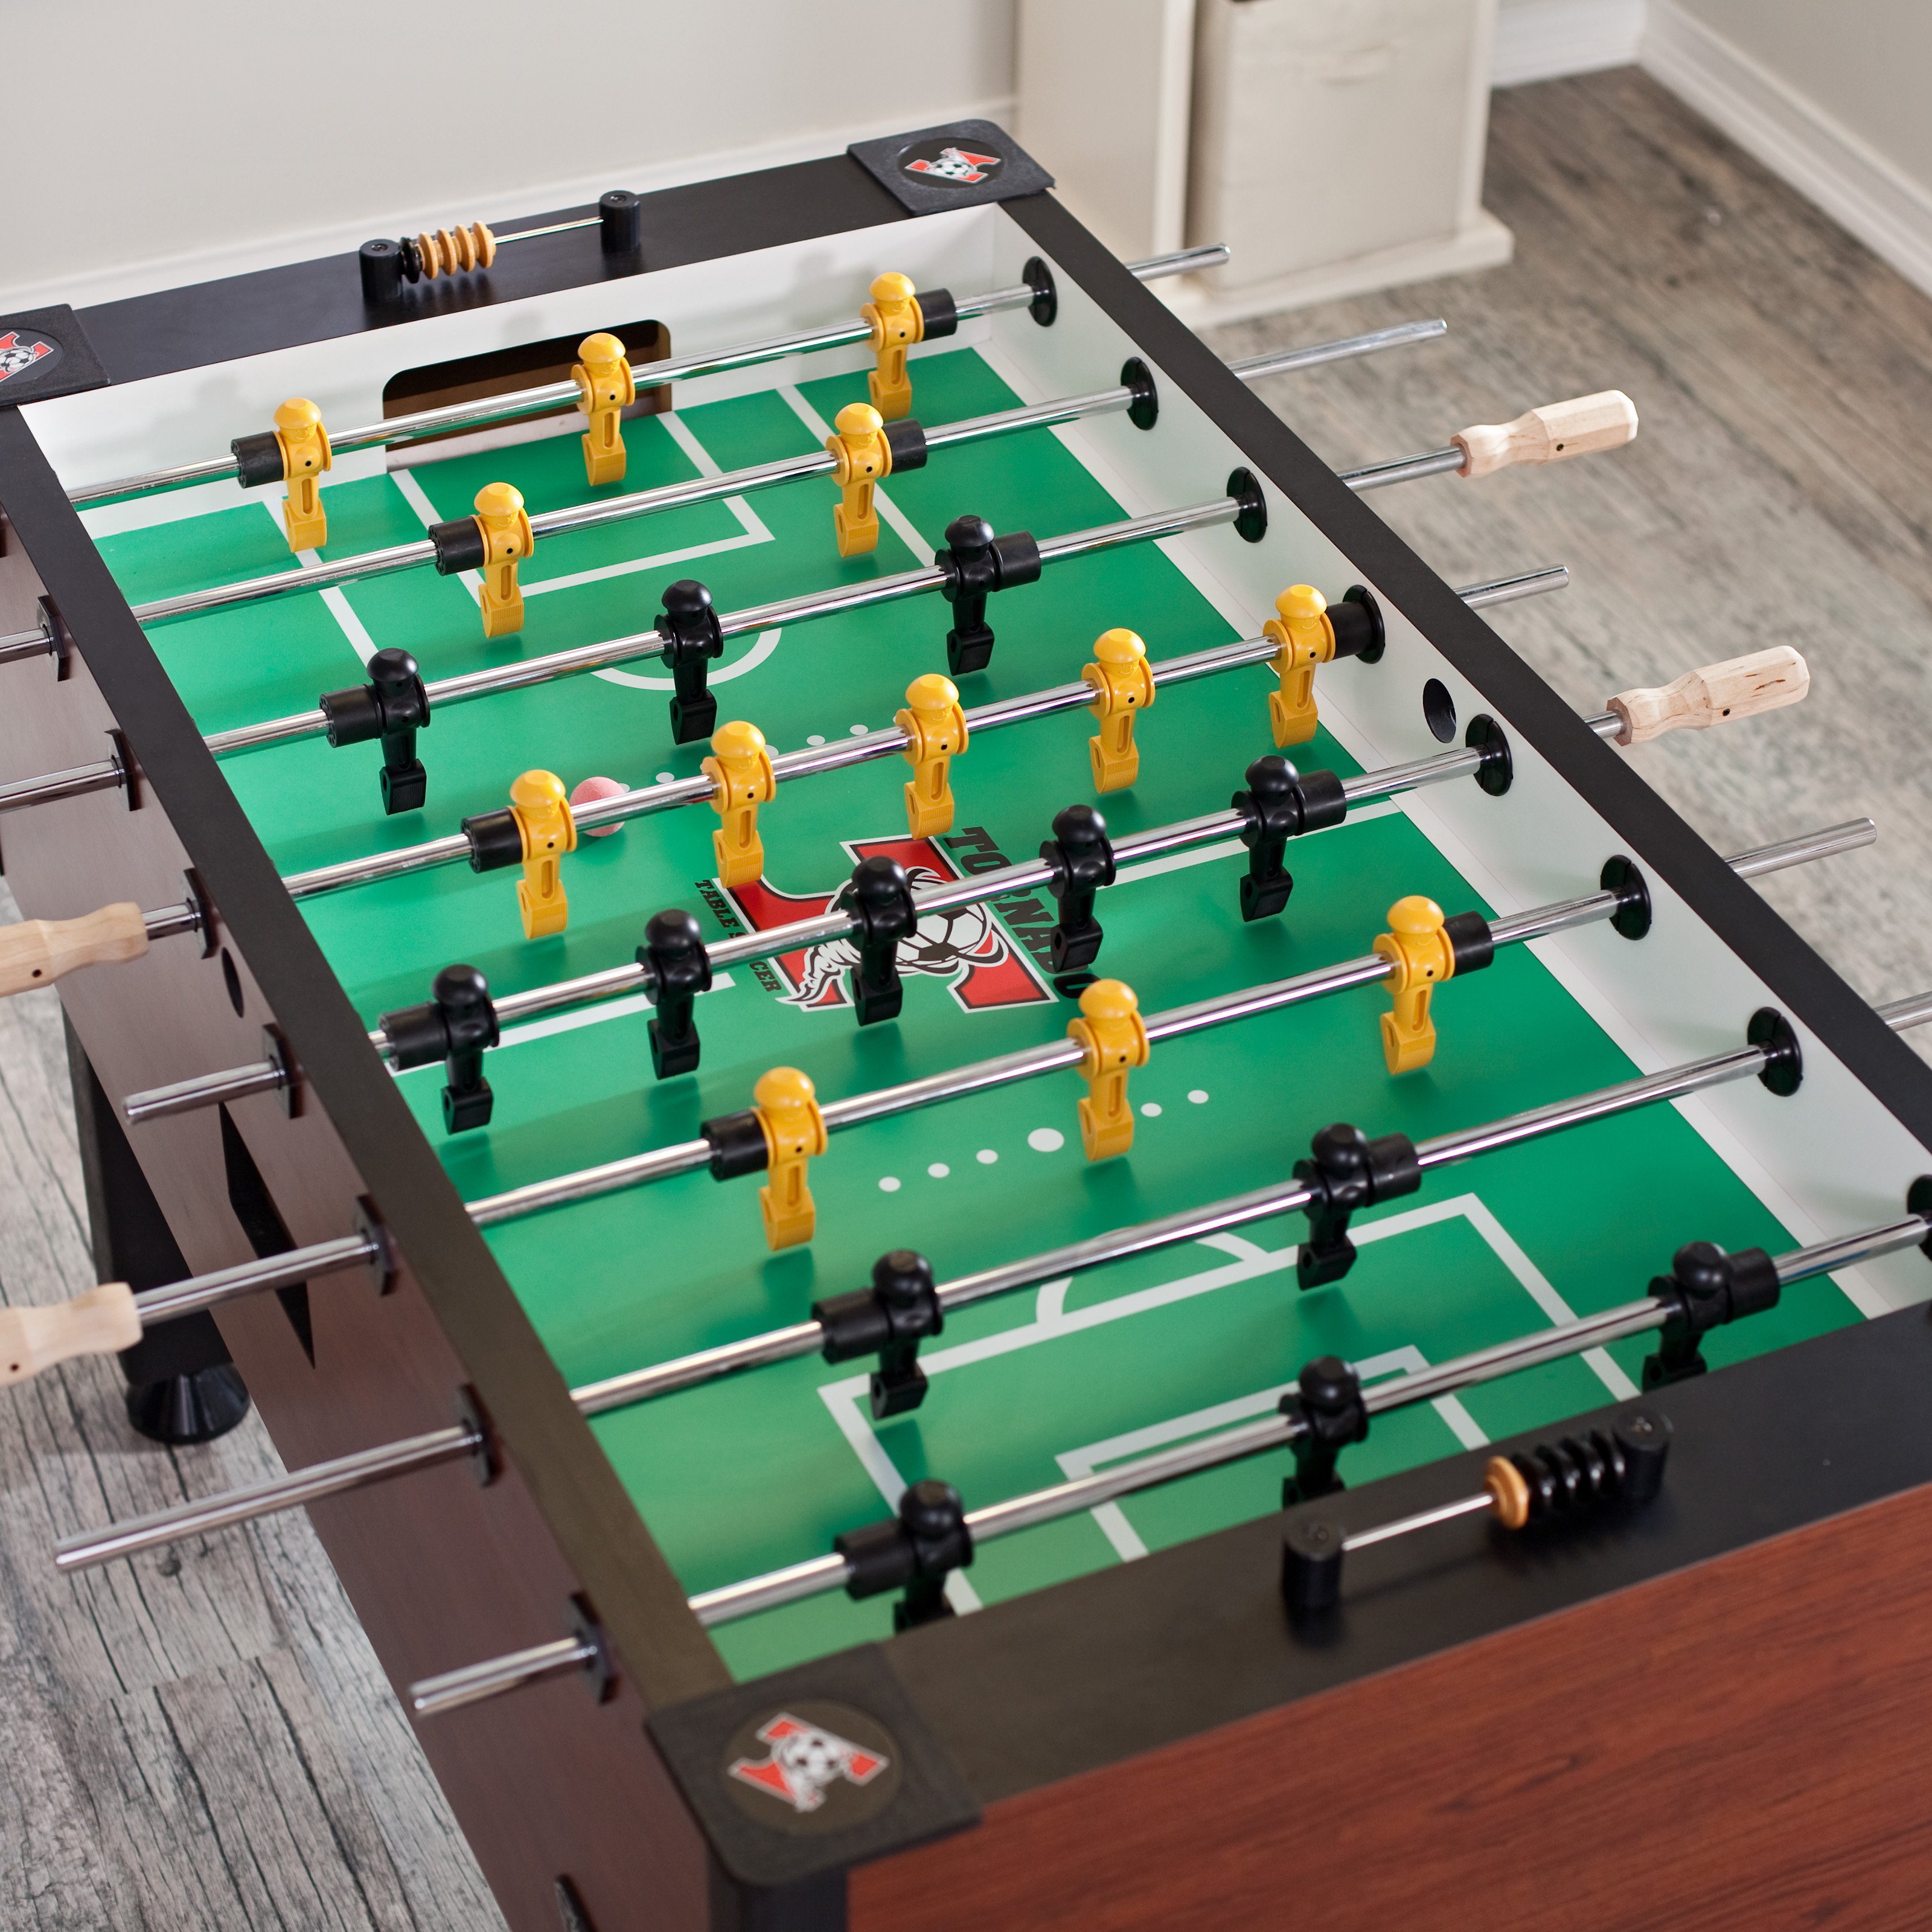 A foosball table game that reminds Rory of an early childhood experience with his dad.